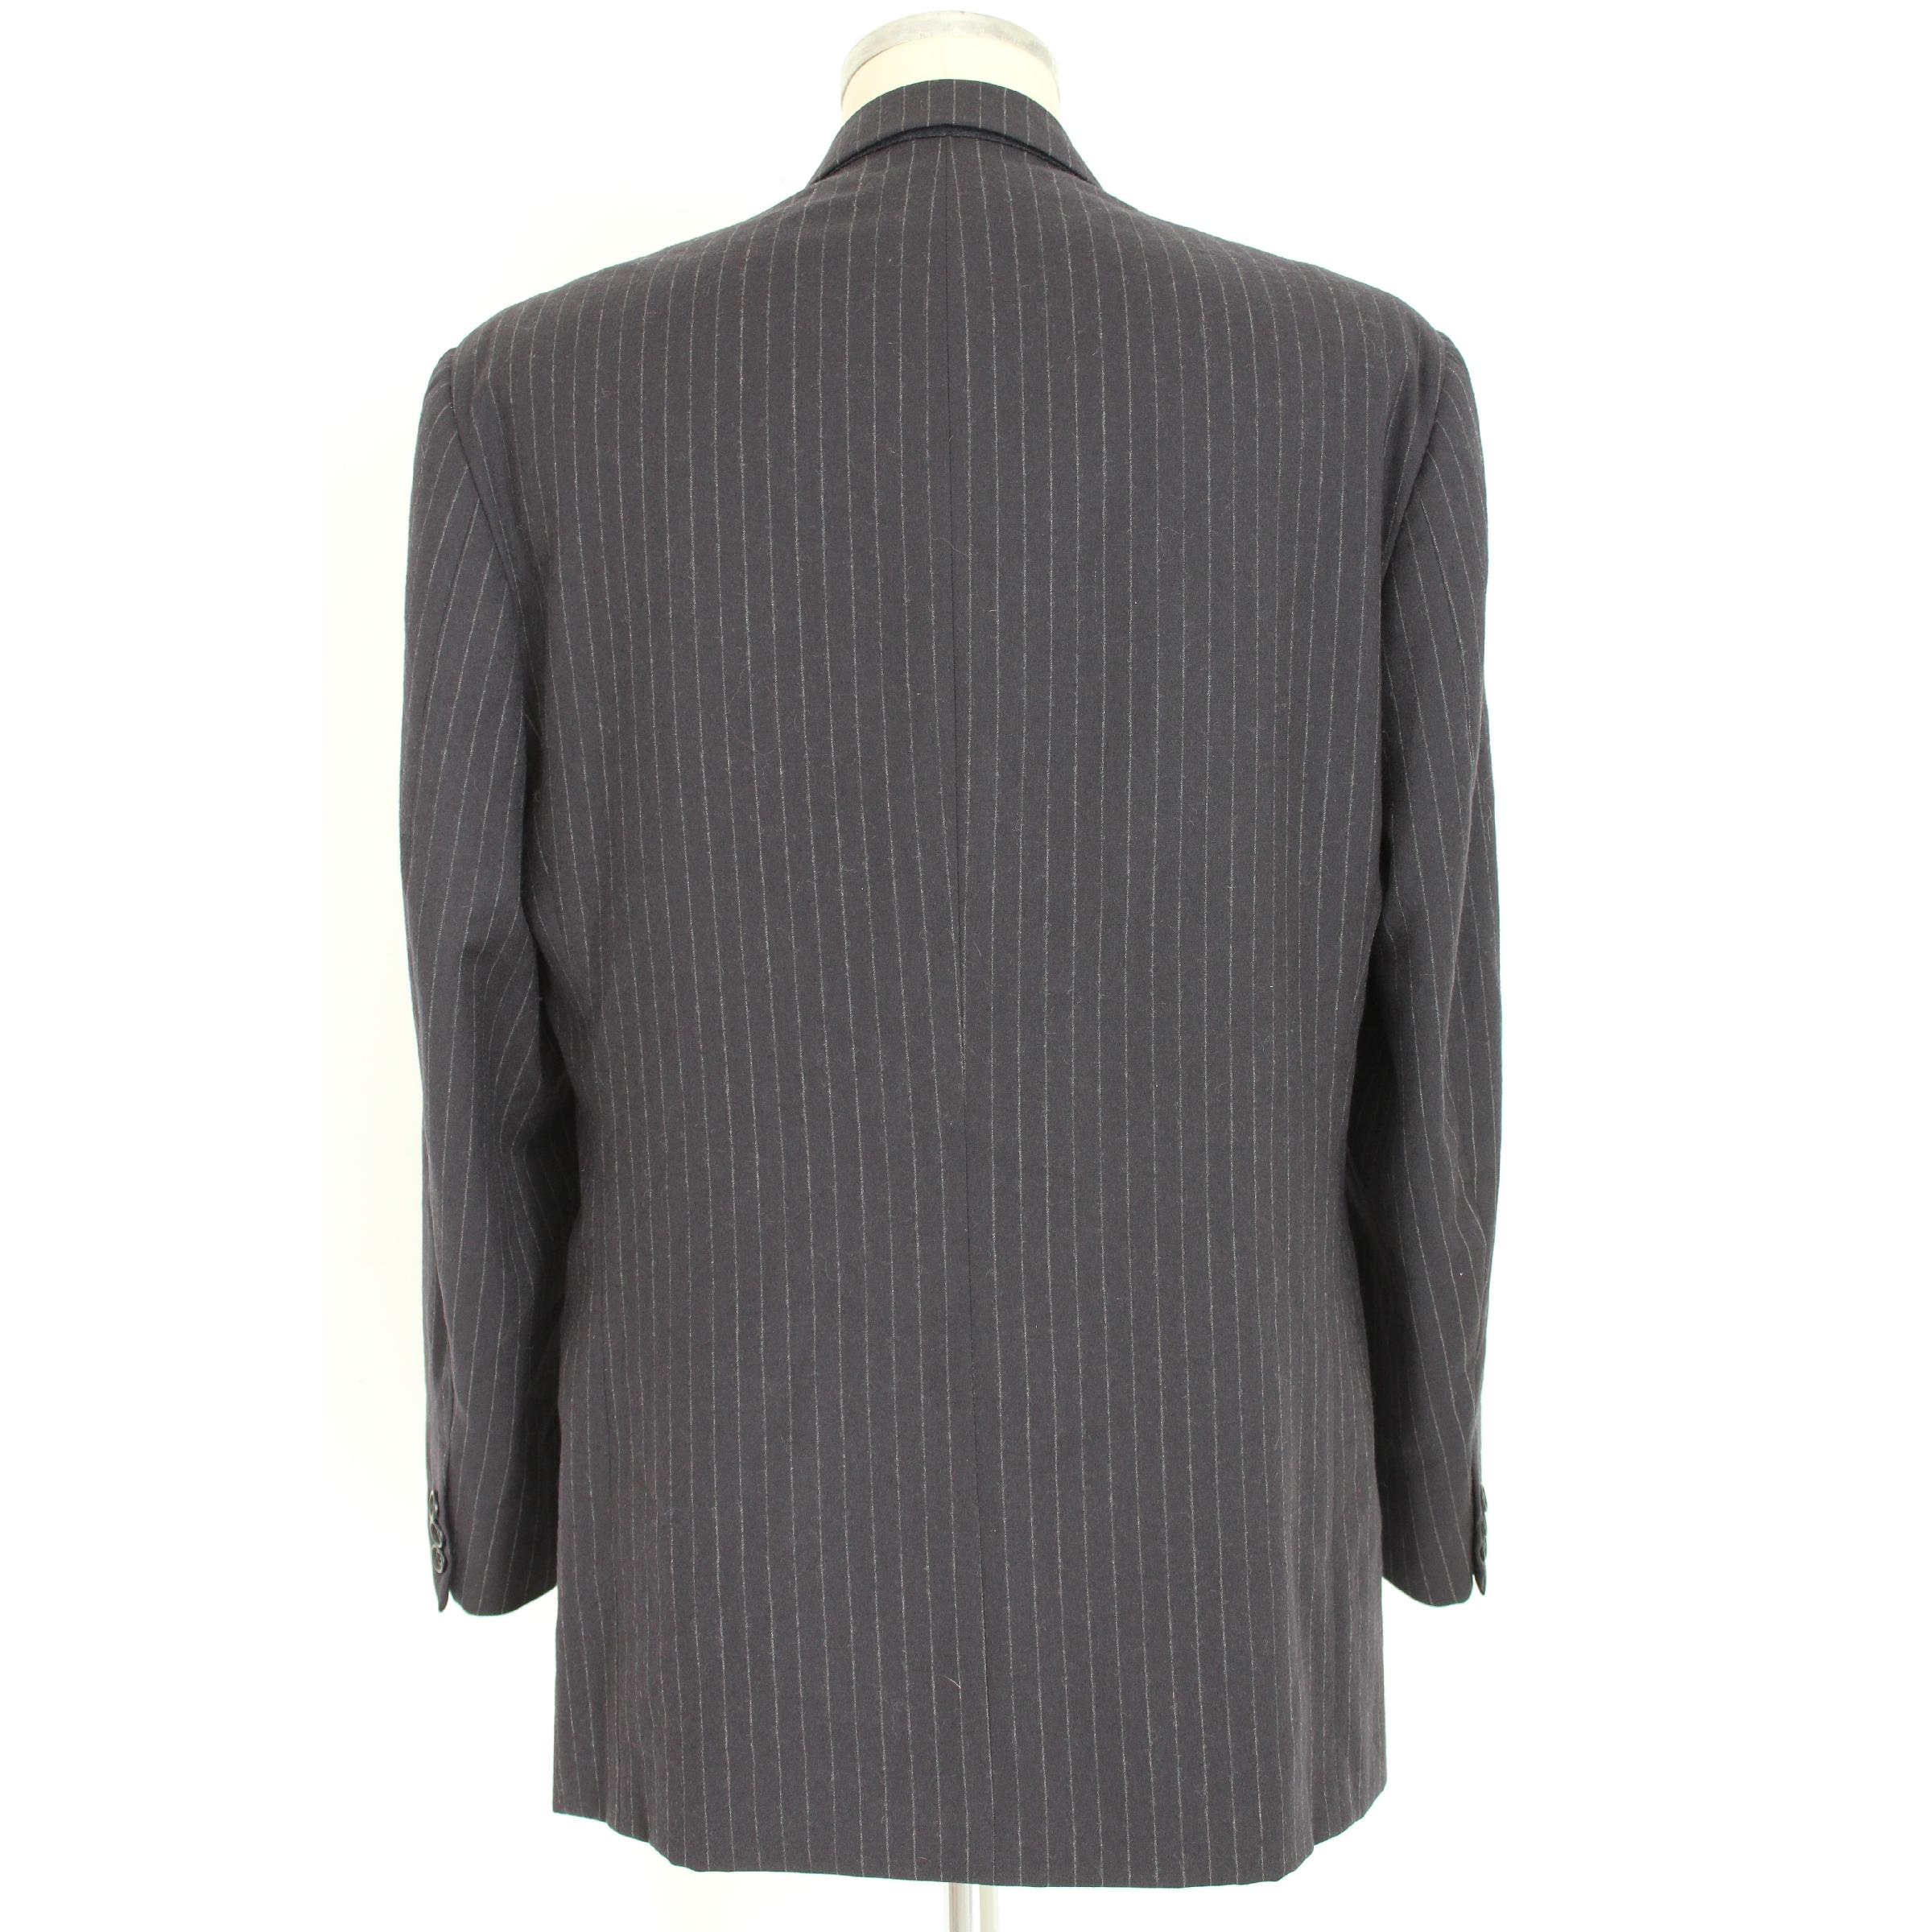 Gianfranco Ferre Studio men's vintage jacket. Double-breasted, pinstriped gray blue, 100% wool. 80s. Made in Italy. Excellent vintage conditions.

Size: 52 It 42 Us 42 Uk

Shoulder: 52 cm
Bust / Chest: 58 cm
Sleeve: 62 cm
Length: 87 cm